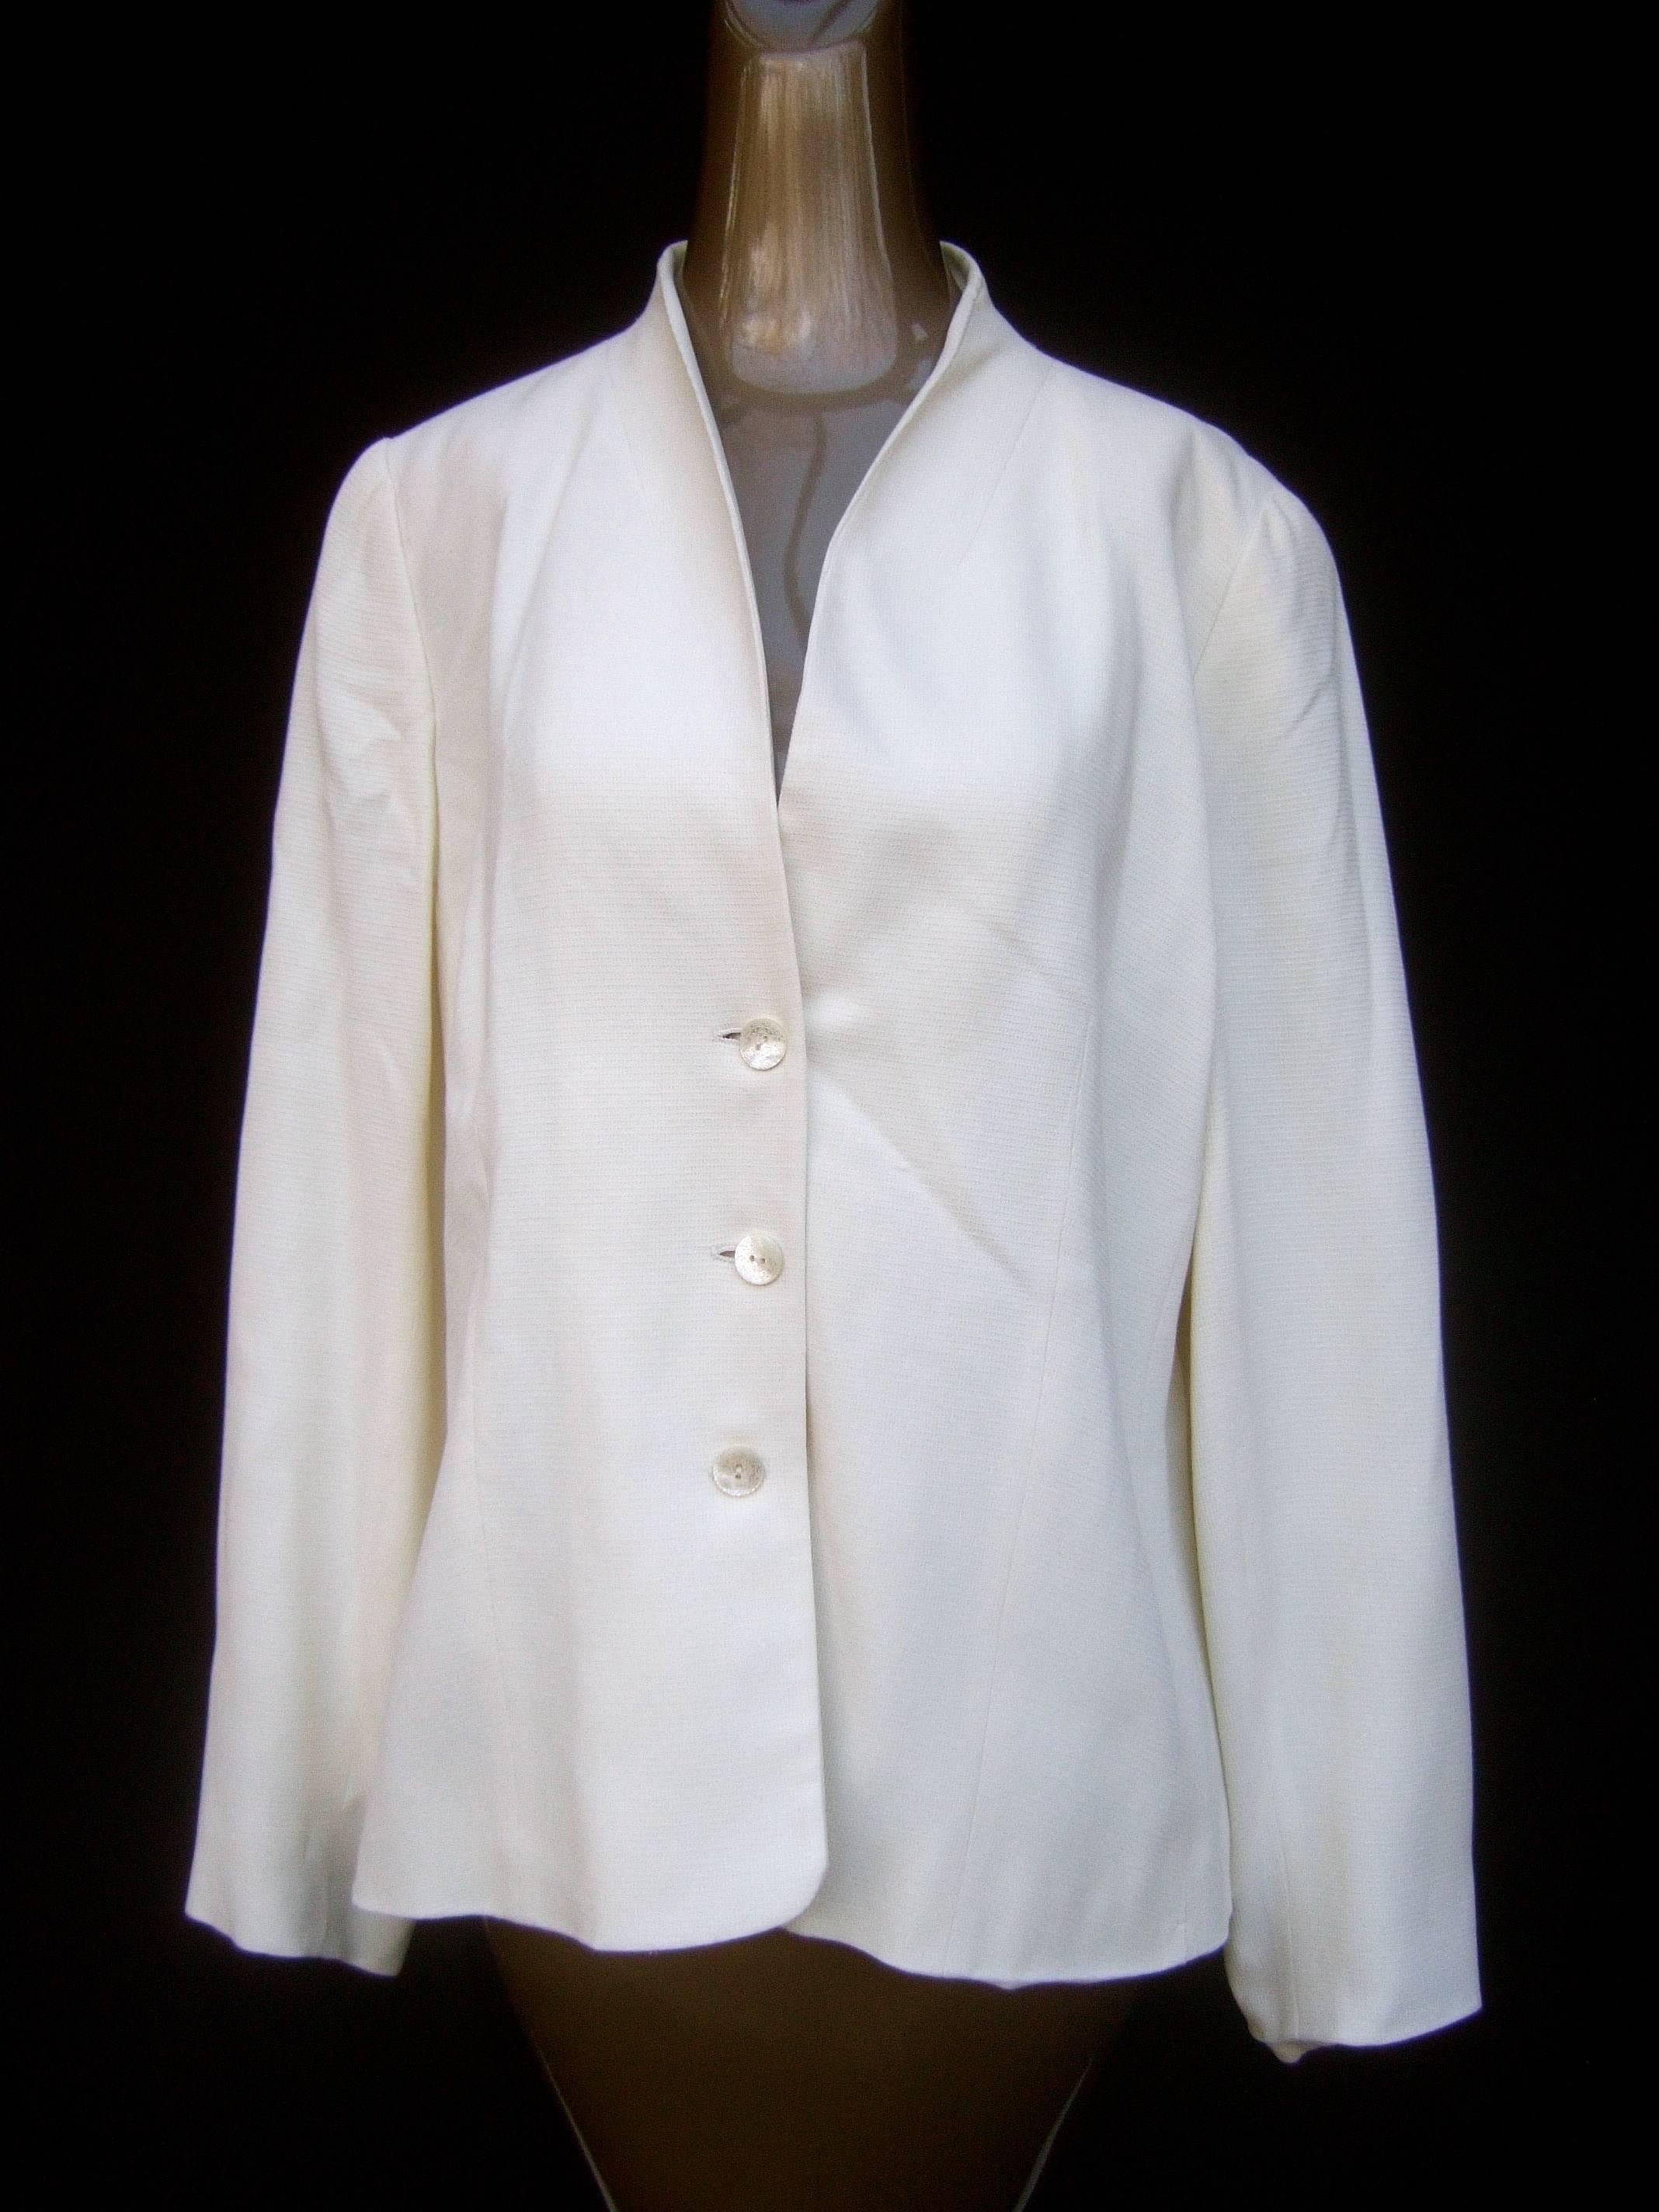 Valentino Italy crisp white light weight jacket US Size 16 
The stylish designer jacket is adorned with a trio 
of mother of pearl style resin buttons that run down 
the front 

The light weight viscose acetate fabric drapes beautifully 
The classic